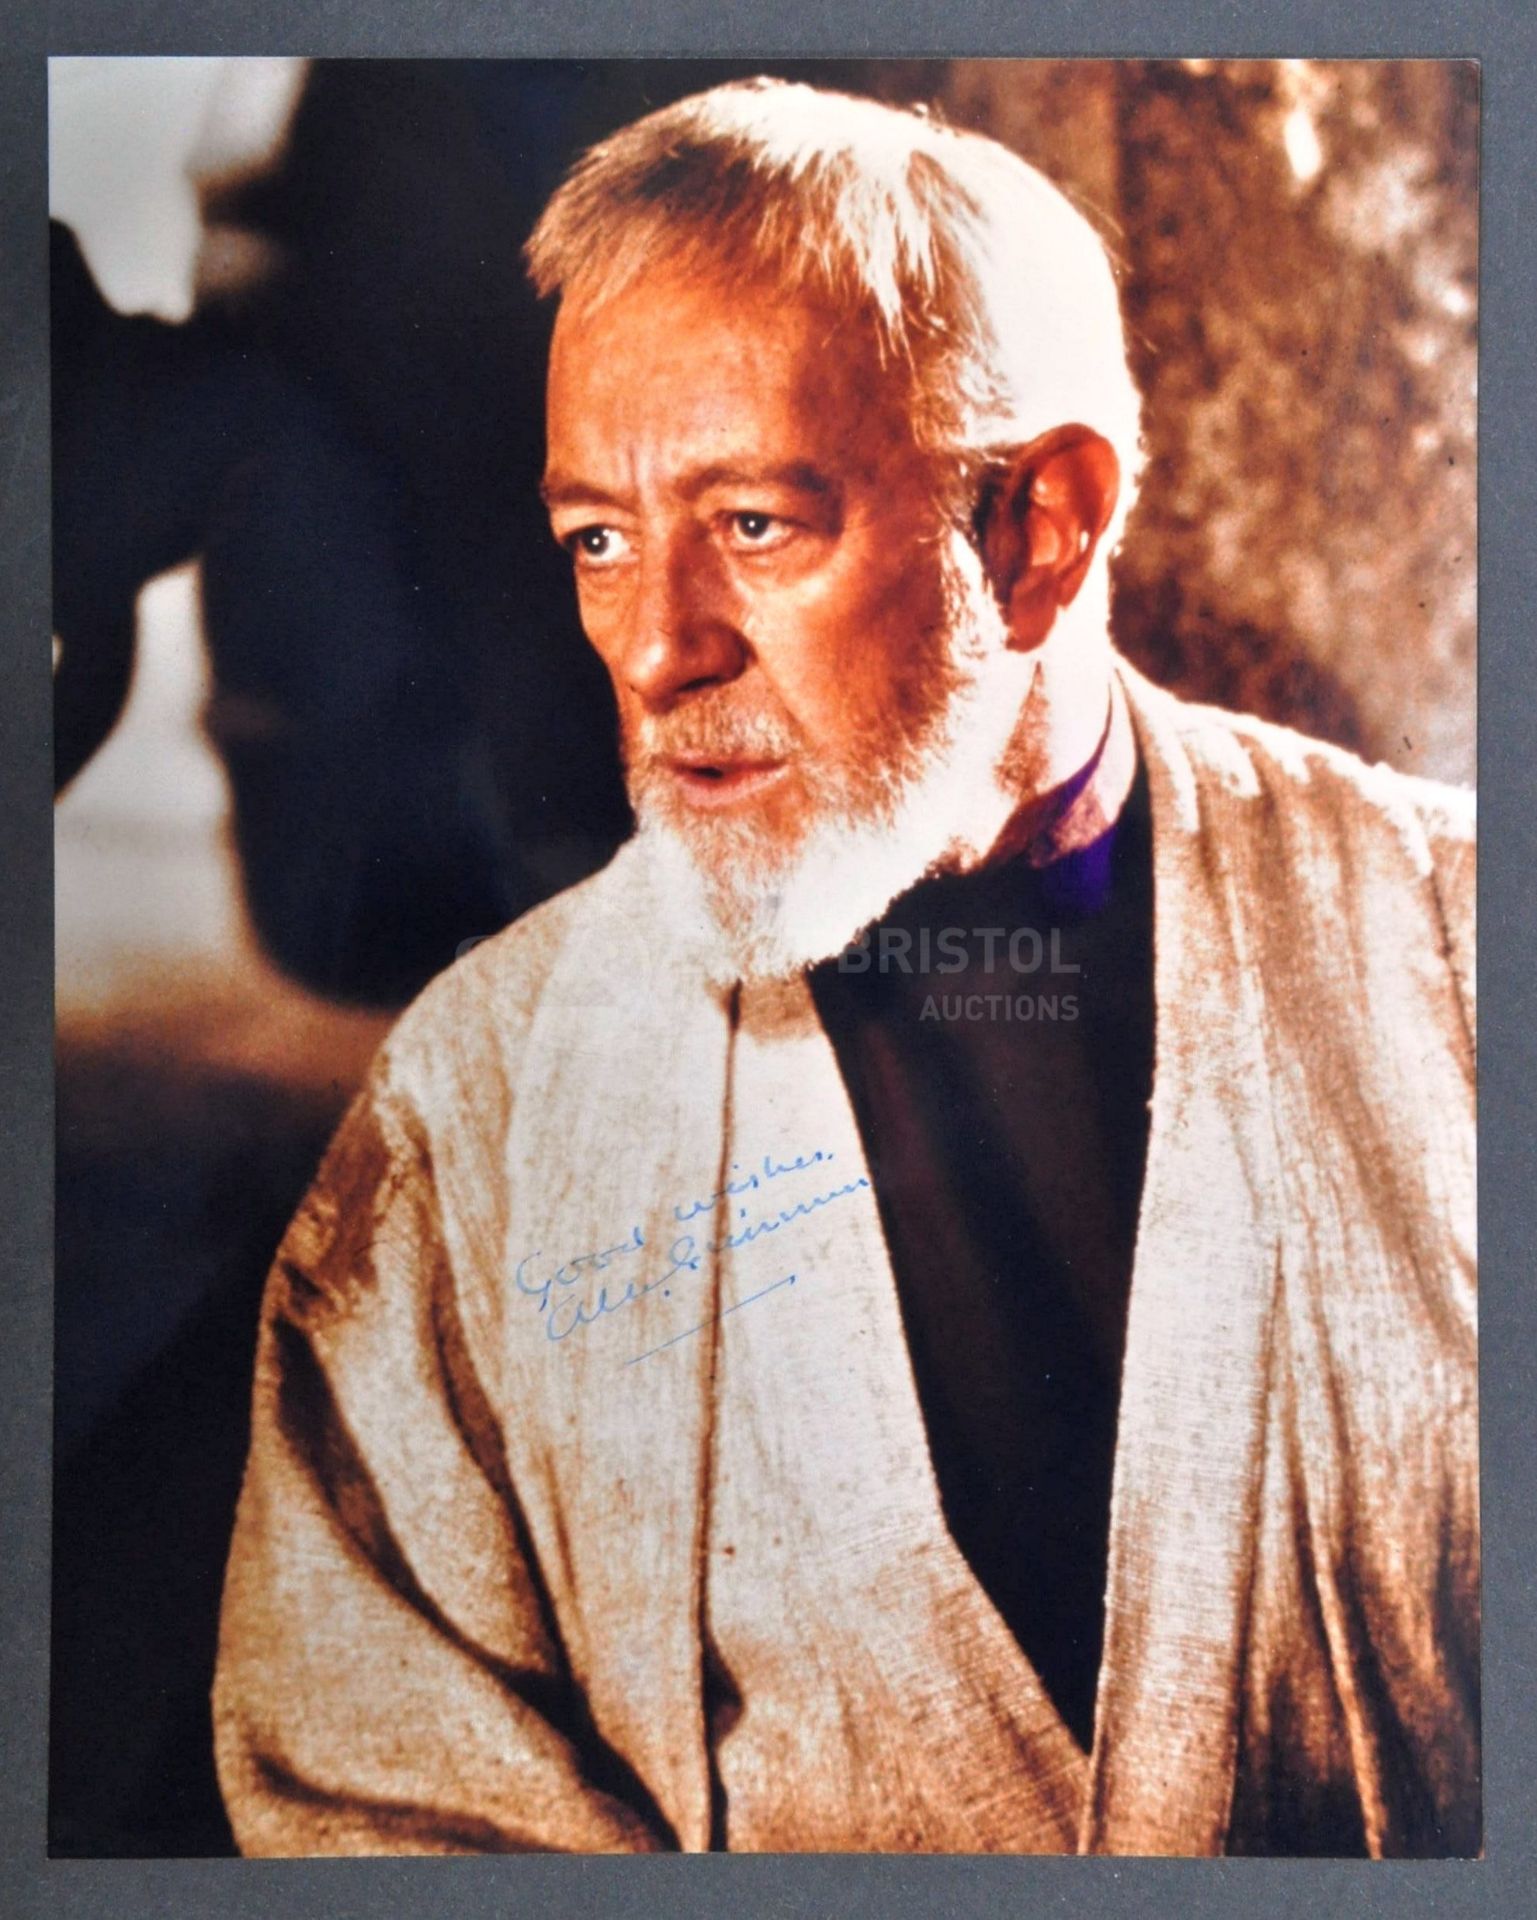 STAR WARS - SIR ALEC GUINNESS - AUTOGRAPHED 8X10" PHOTOGRAPH - ACOA